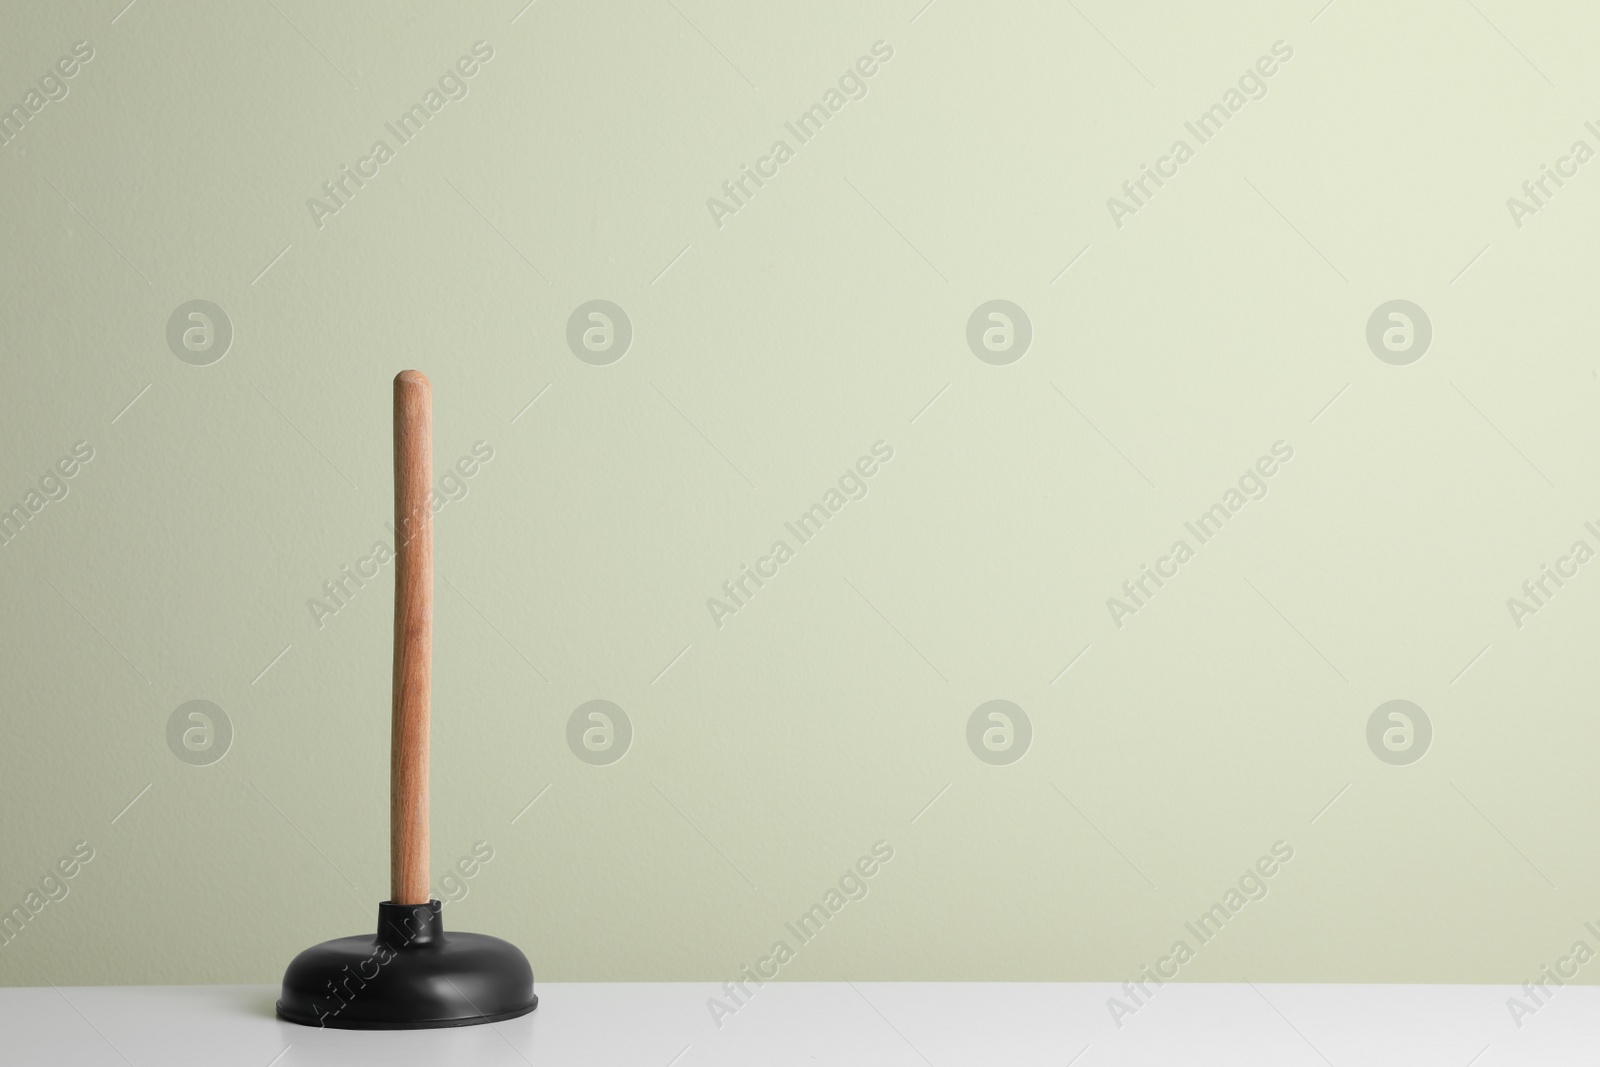 Photo of Plunger on white table against light background. Space for text